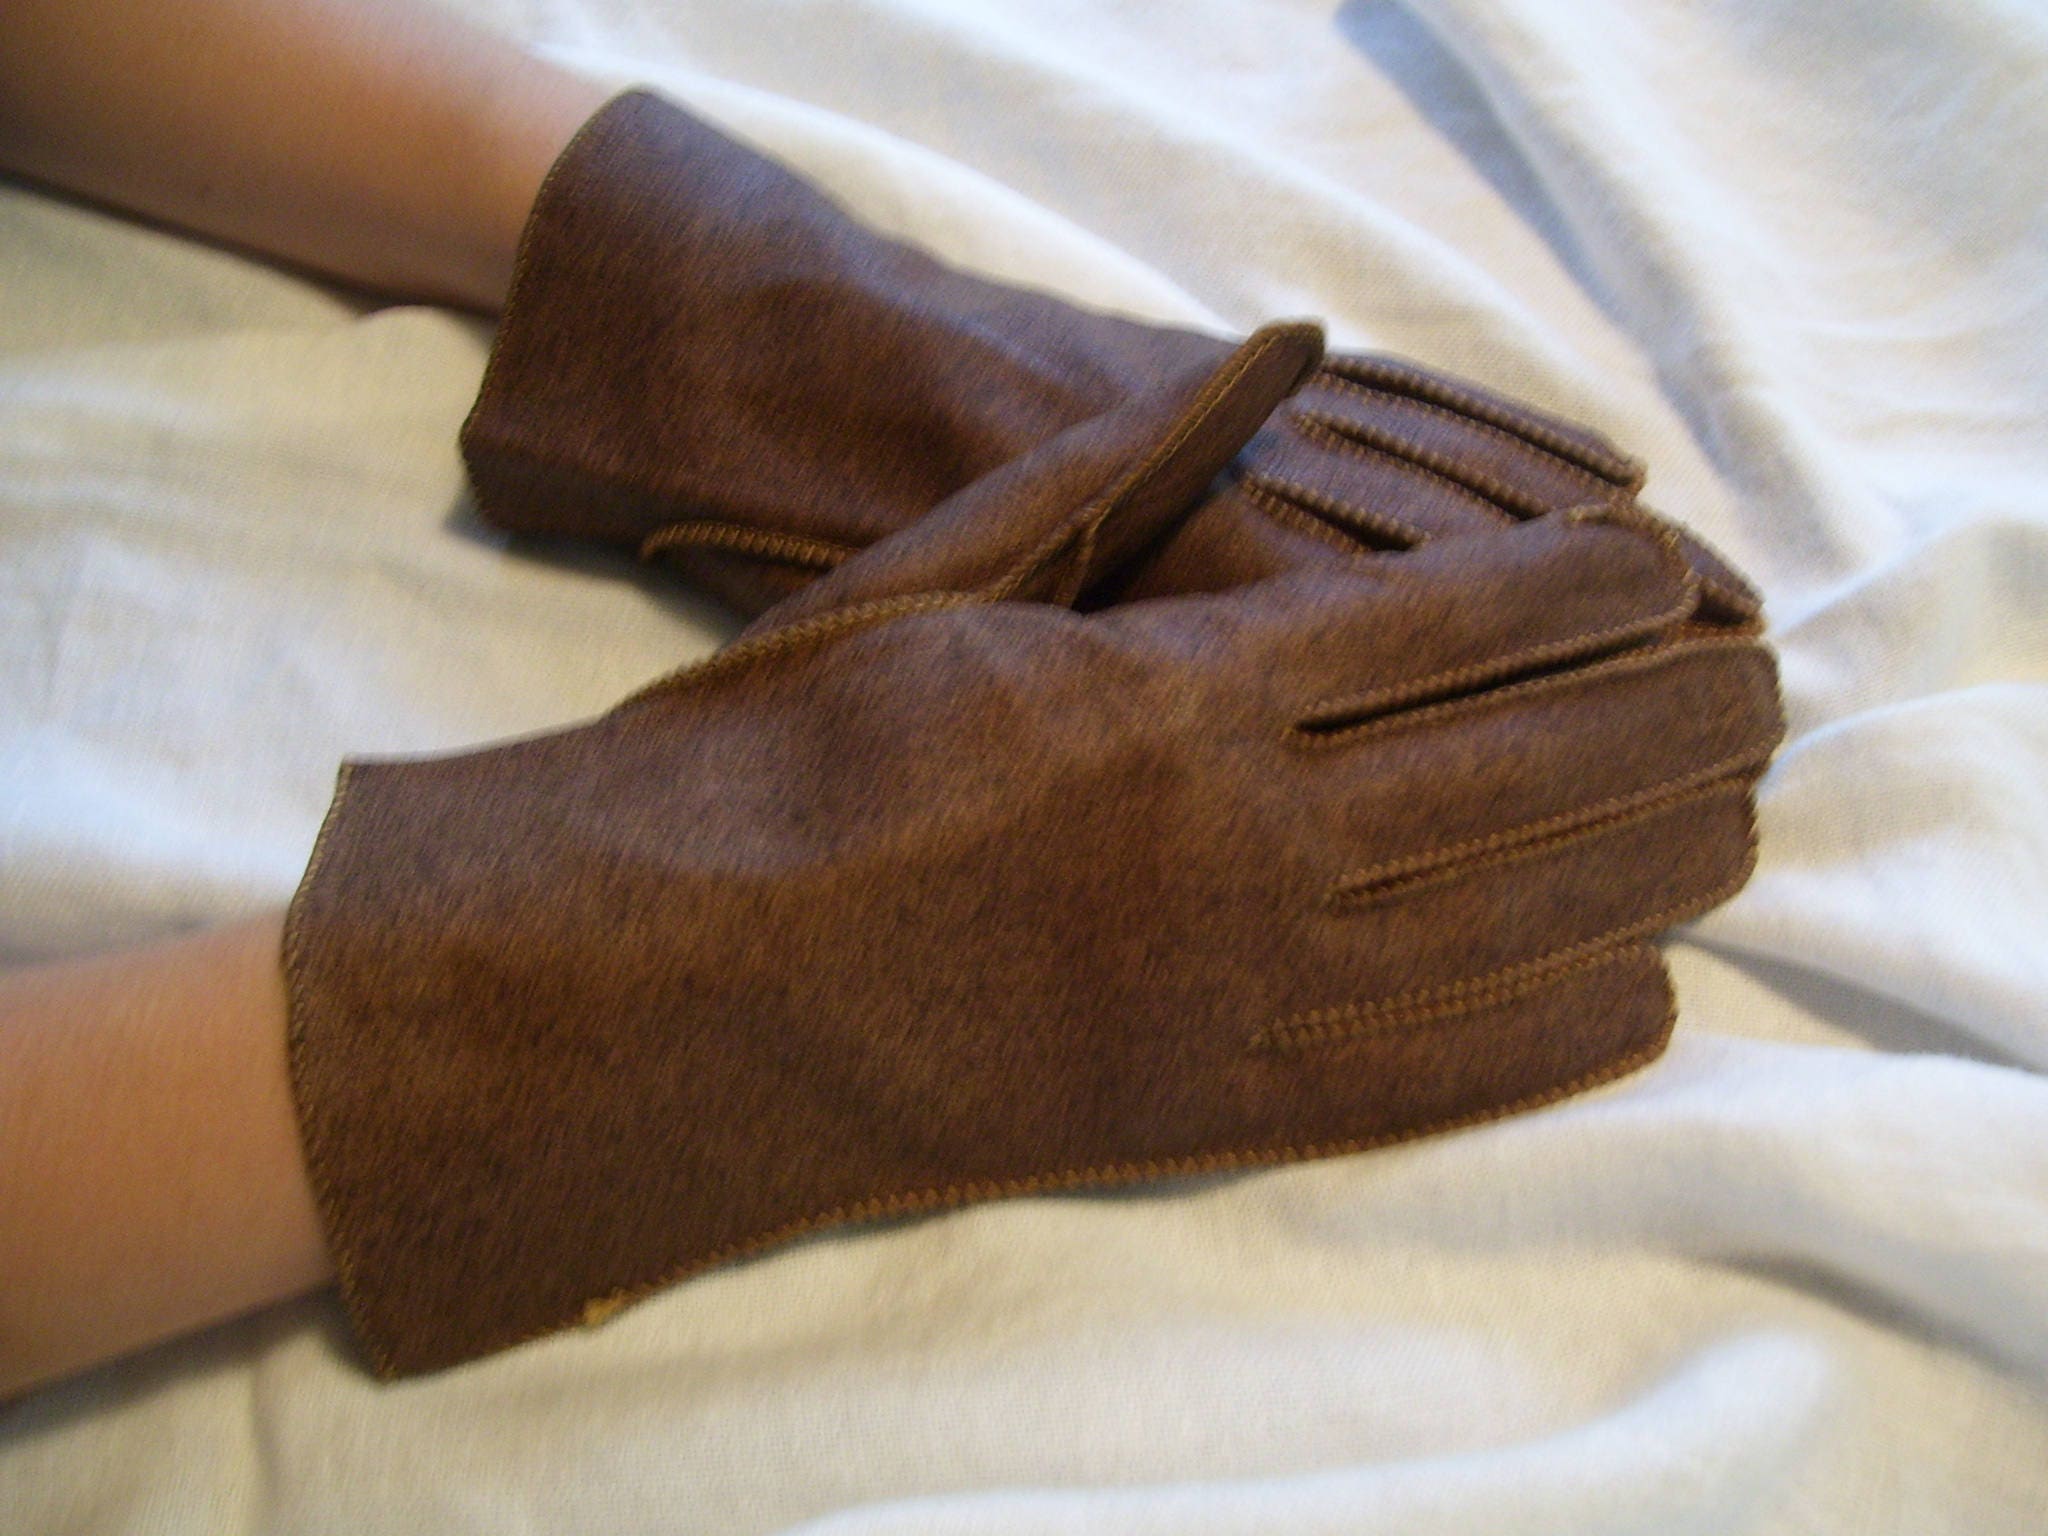 Accessories Gloves & Mittens Evening & Formal Gloves Vintage NOS New Dead Stock White Nylon Embroidered Scalloped Gloves---Size 6 to 6 1/2---Glove Auction #649---0721 